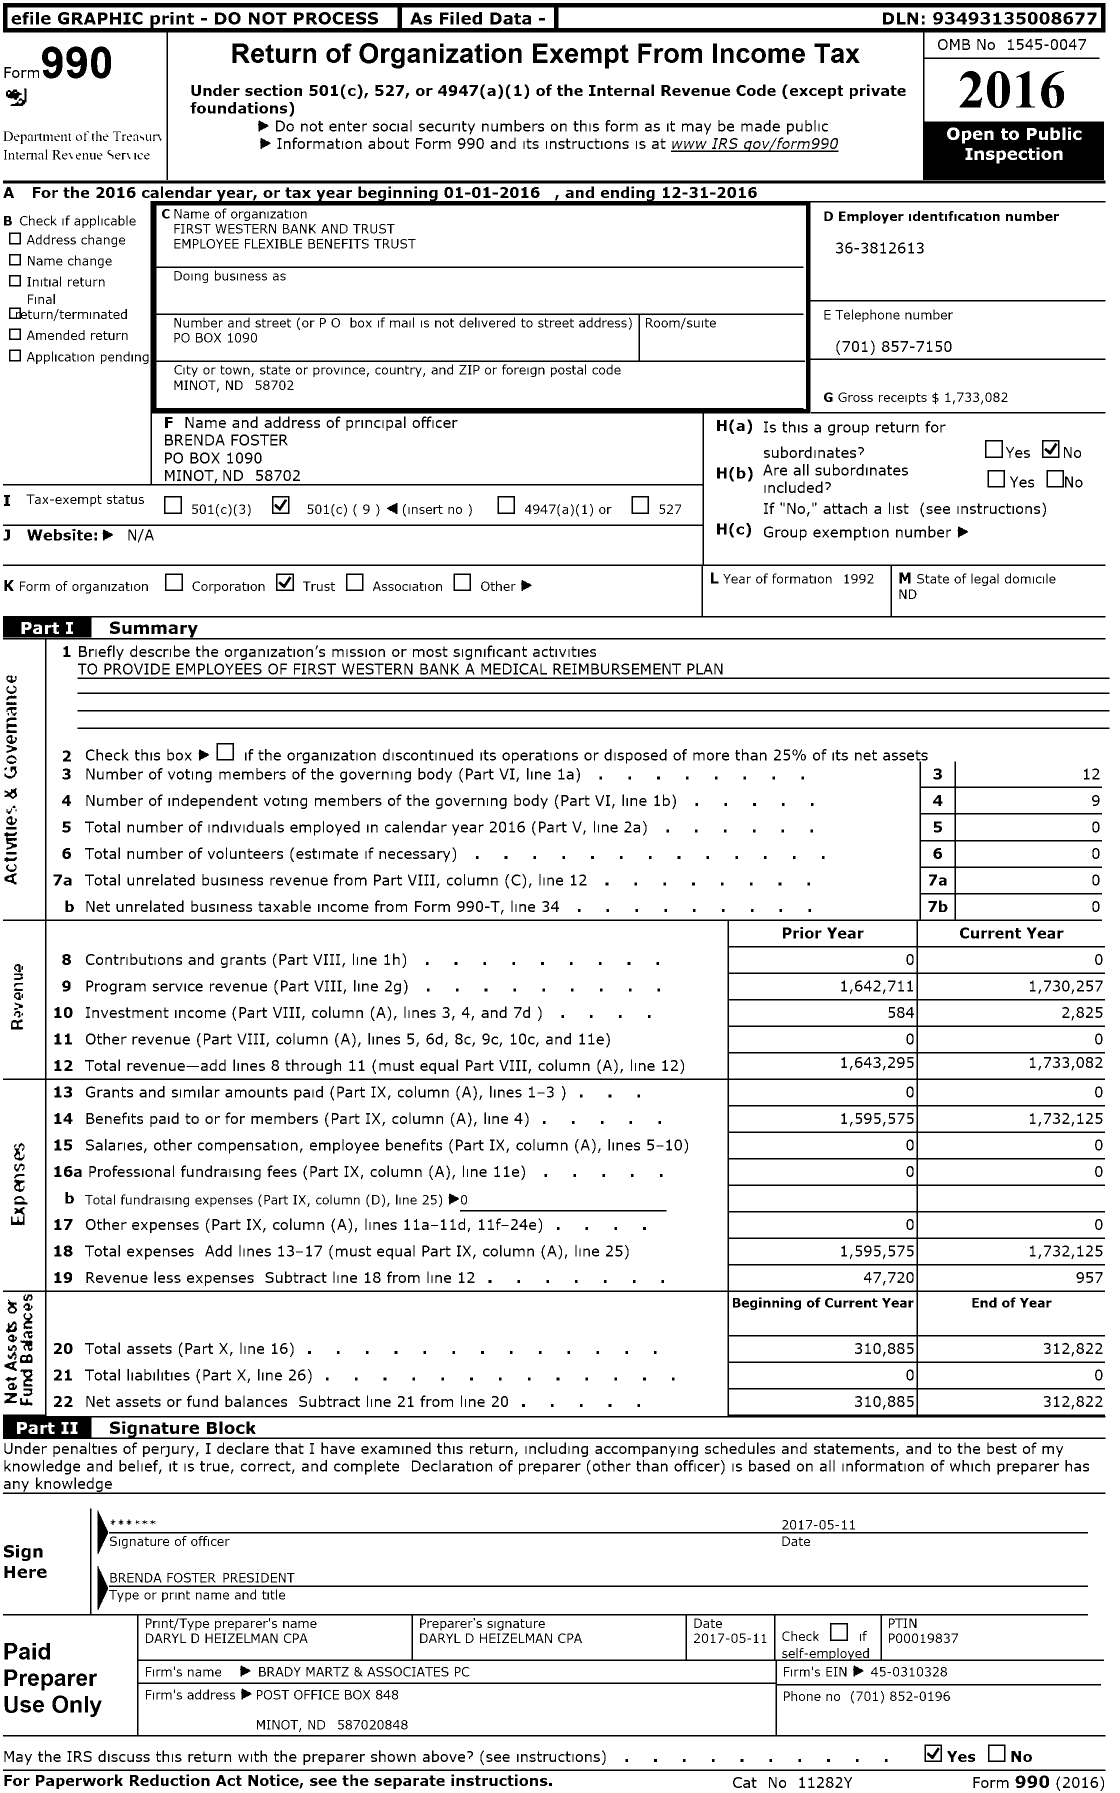 Image of first page of 2016 Form 990O for First Western Bank and Trust Employee Flexible Benefits Trust